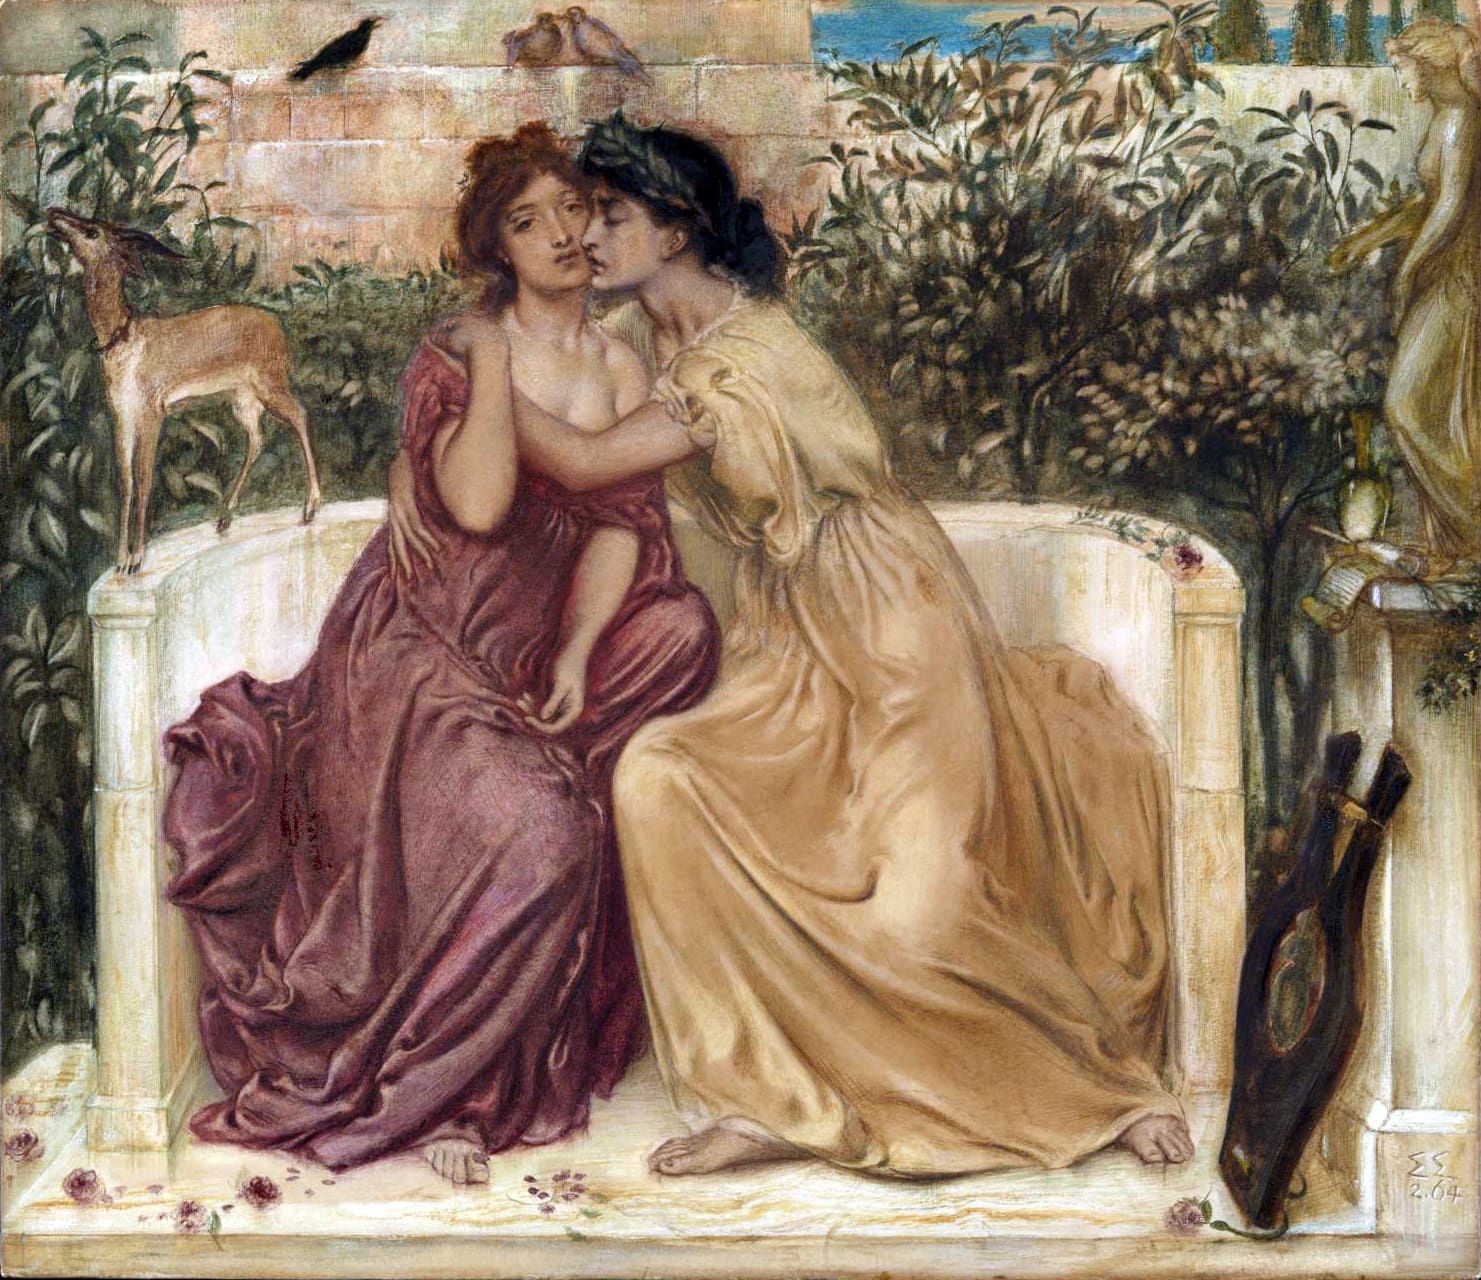 Two young women embracing